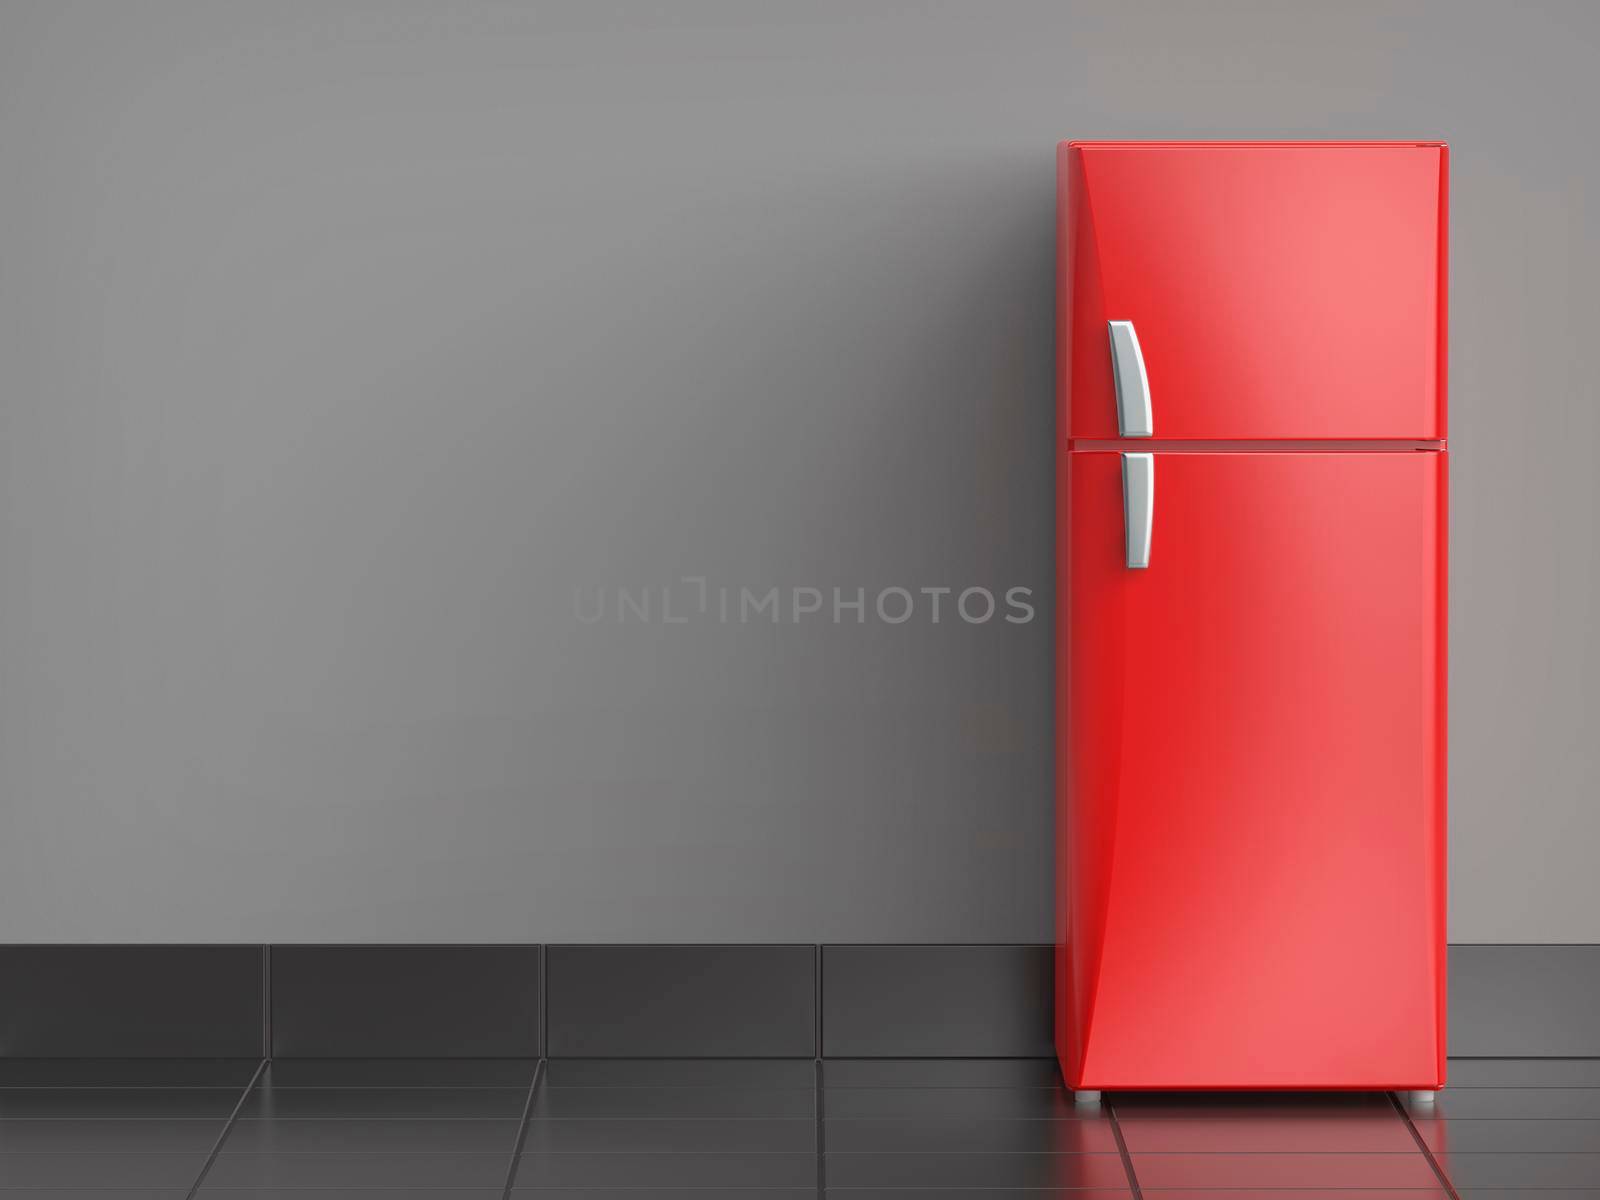 Red refrigerator in the kitchen, front view